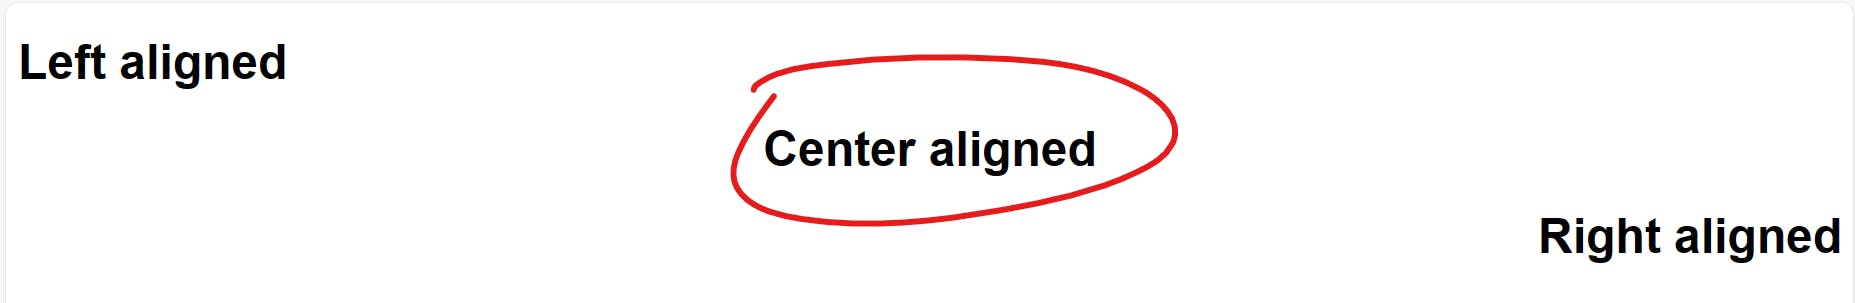 Demo of center aligned text